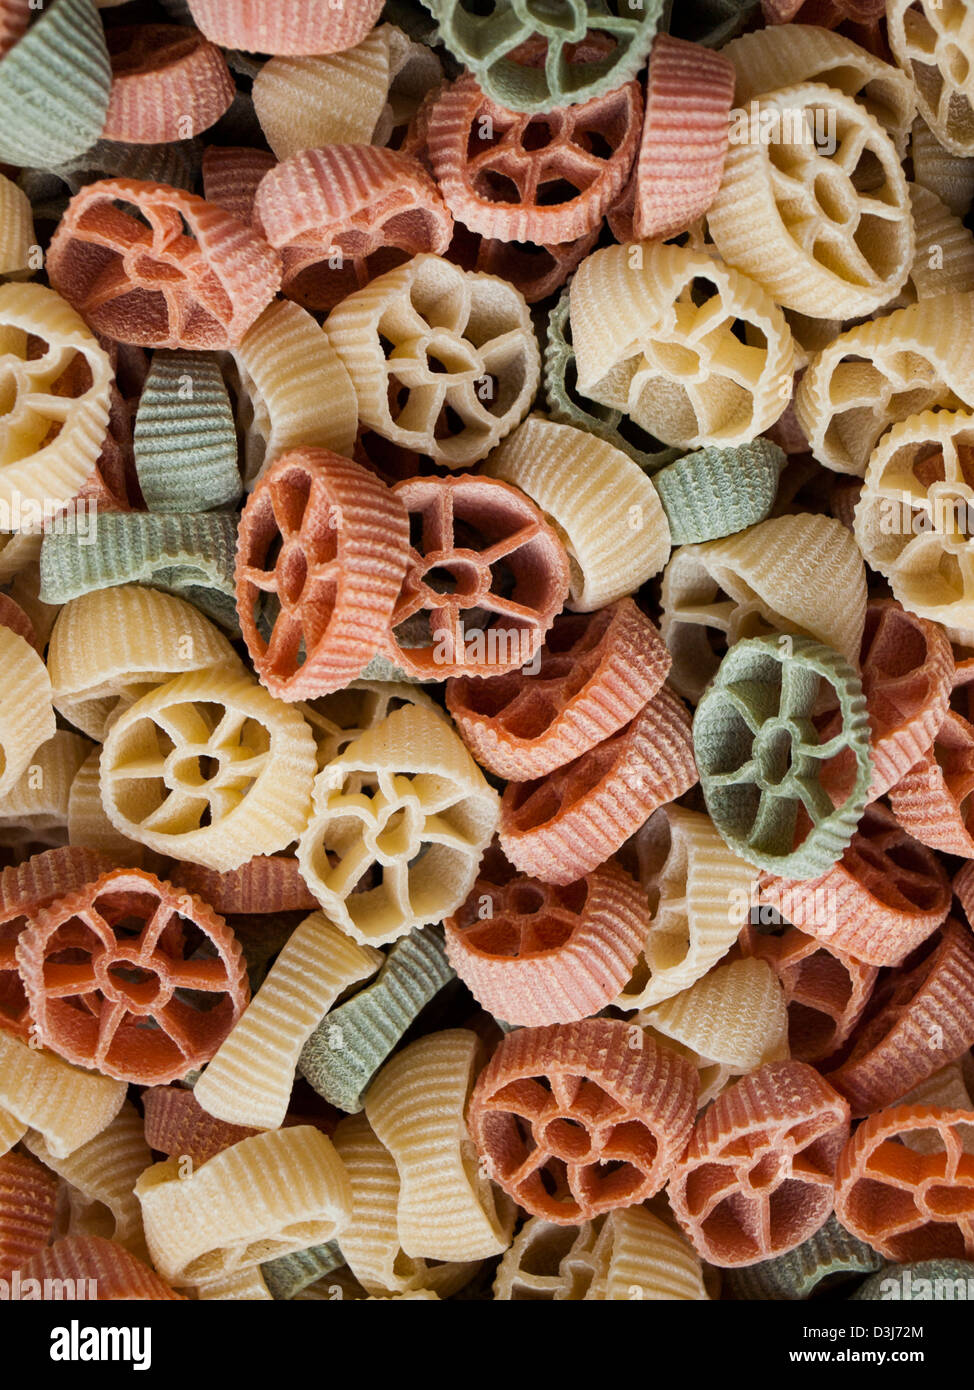 Gourmet pasta at the local farmers market. Farmers markets are a traditional way of selling agricultural products. Stock Photo